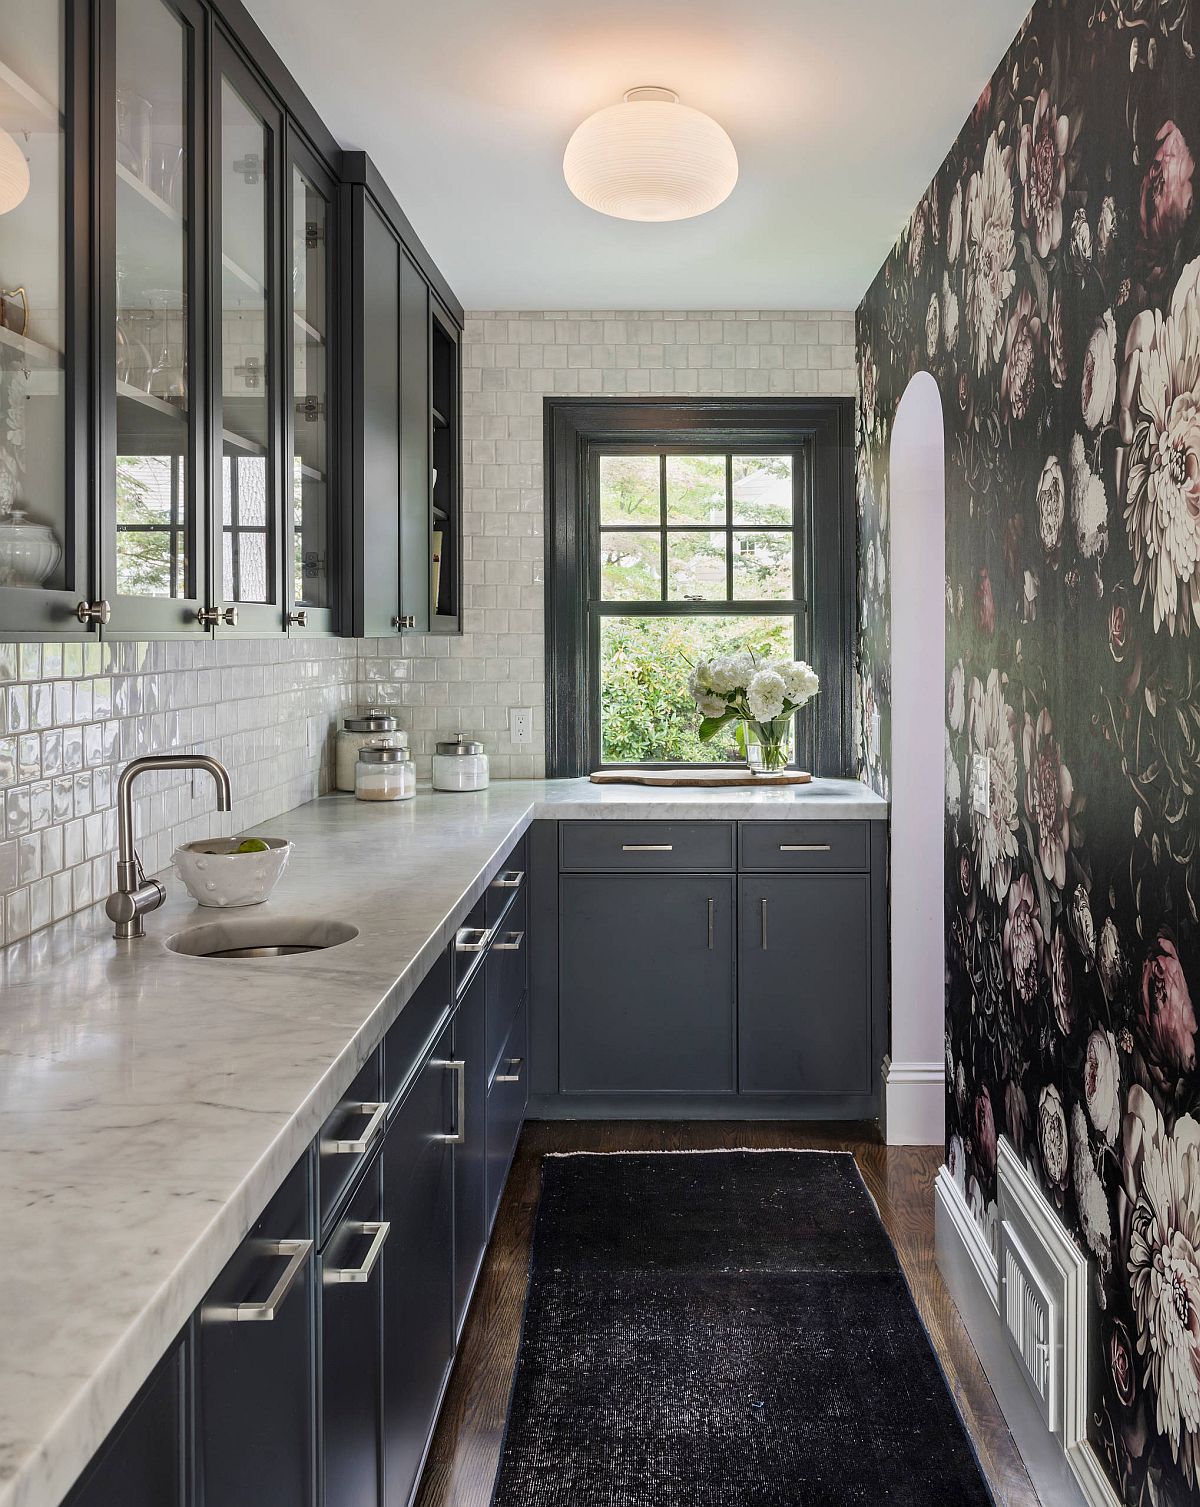 Flowery wallpaper covers an entire wall in this narrow kitchen and gives it a dashing, unique aesthetic